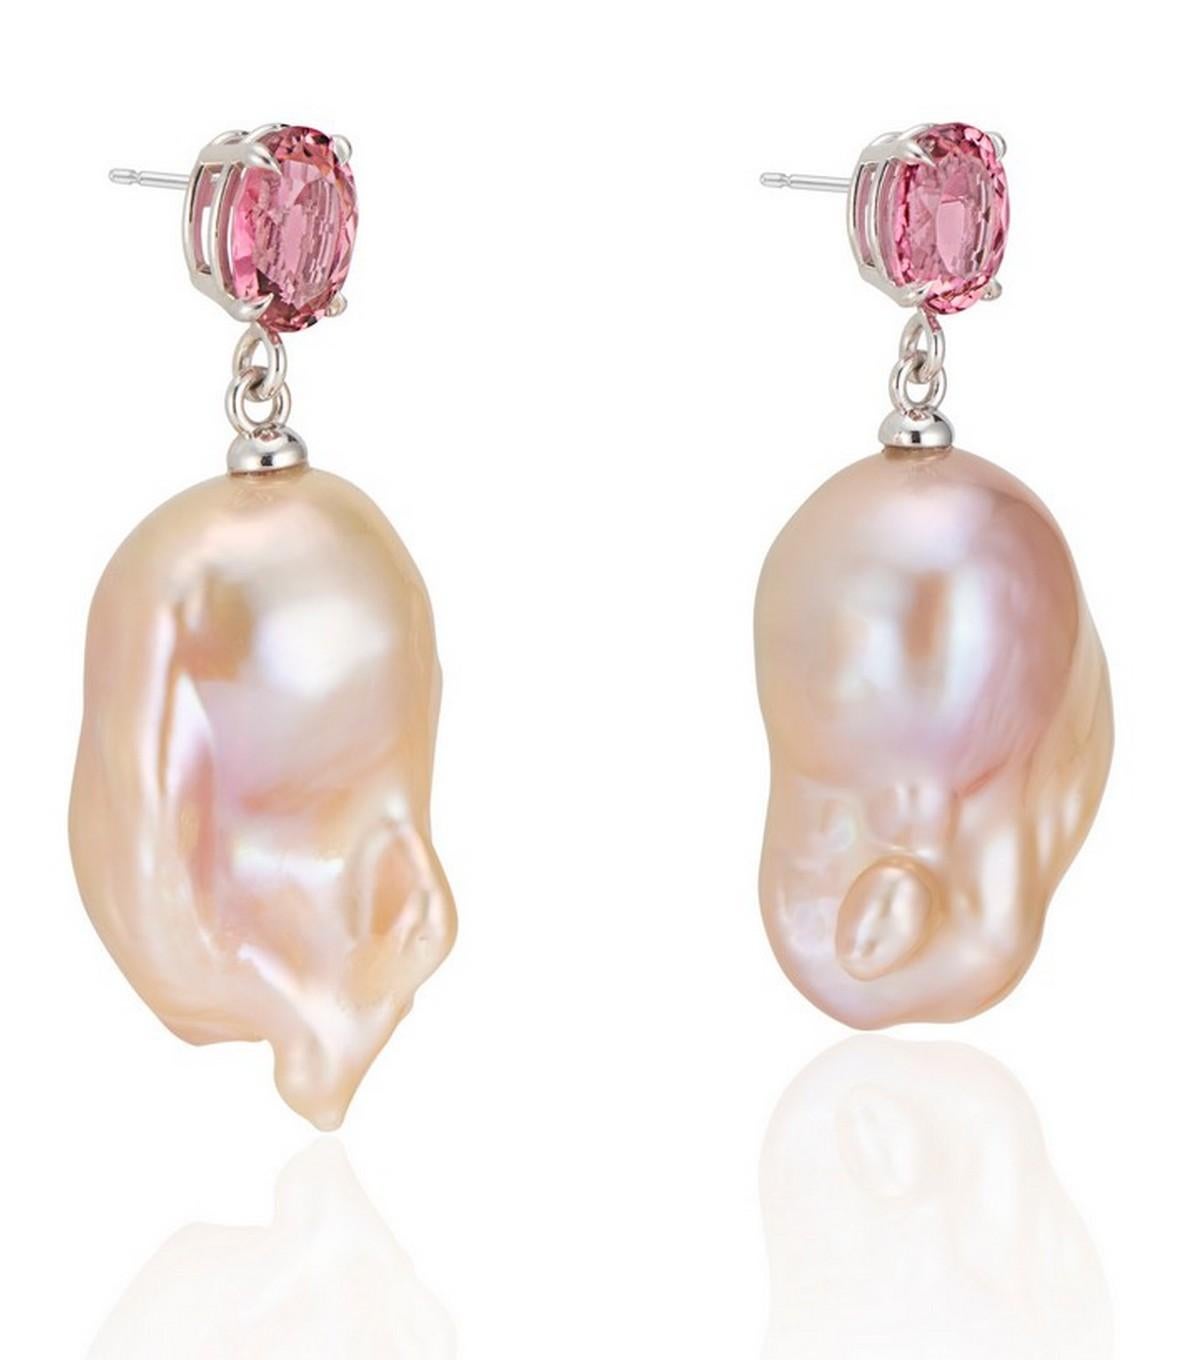 Vibrant Pink Tourmaline set in a high polish 14K white gold basket setting paired with a natural color pink/golden hue baroque pearl drop.

The vibrant color of the tourmaline draws out the pinkish hue in these natural colored freshwater baroque